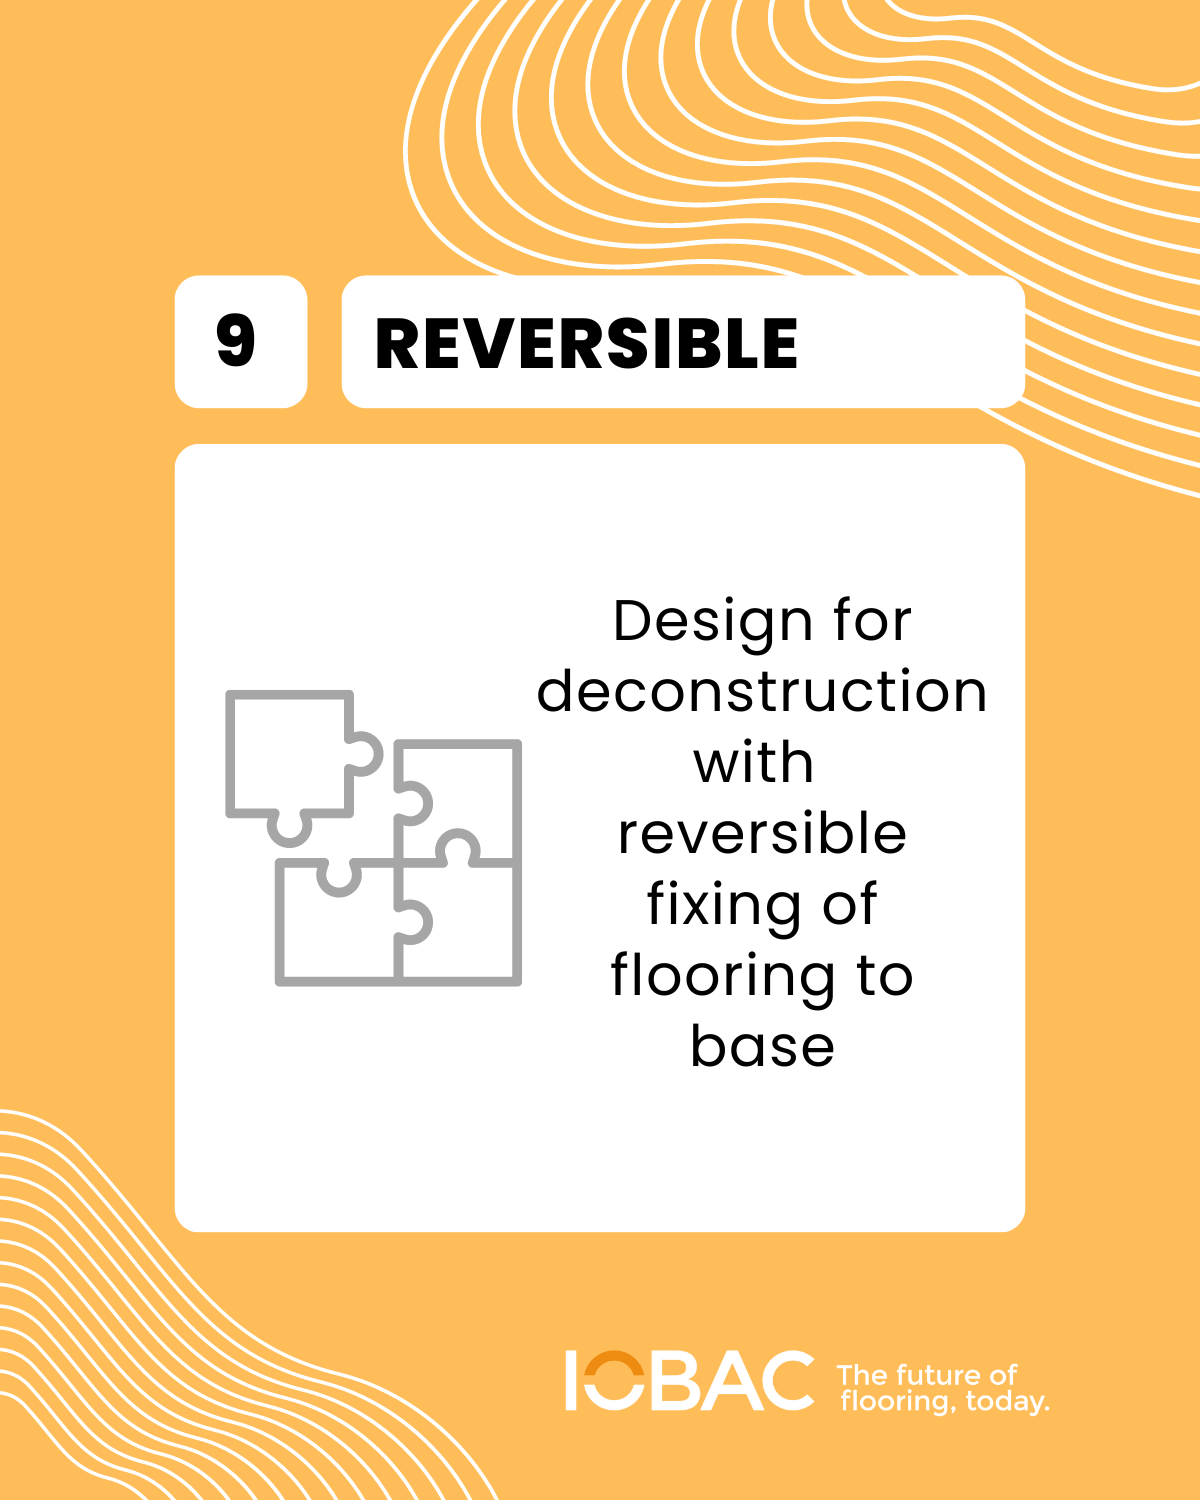 Reasons to Specify Adhesive-free Flooring -Design for Deconstruction